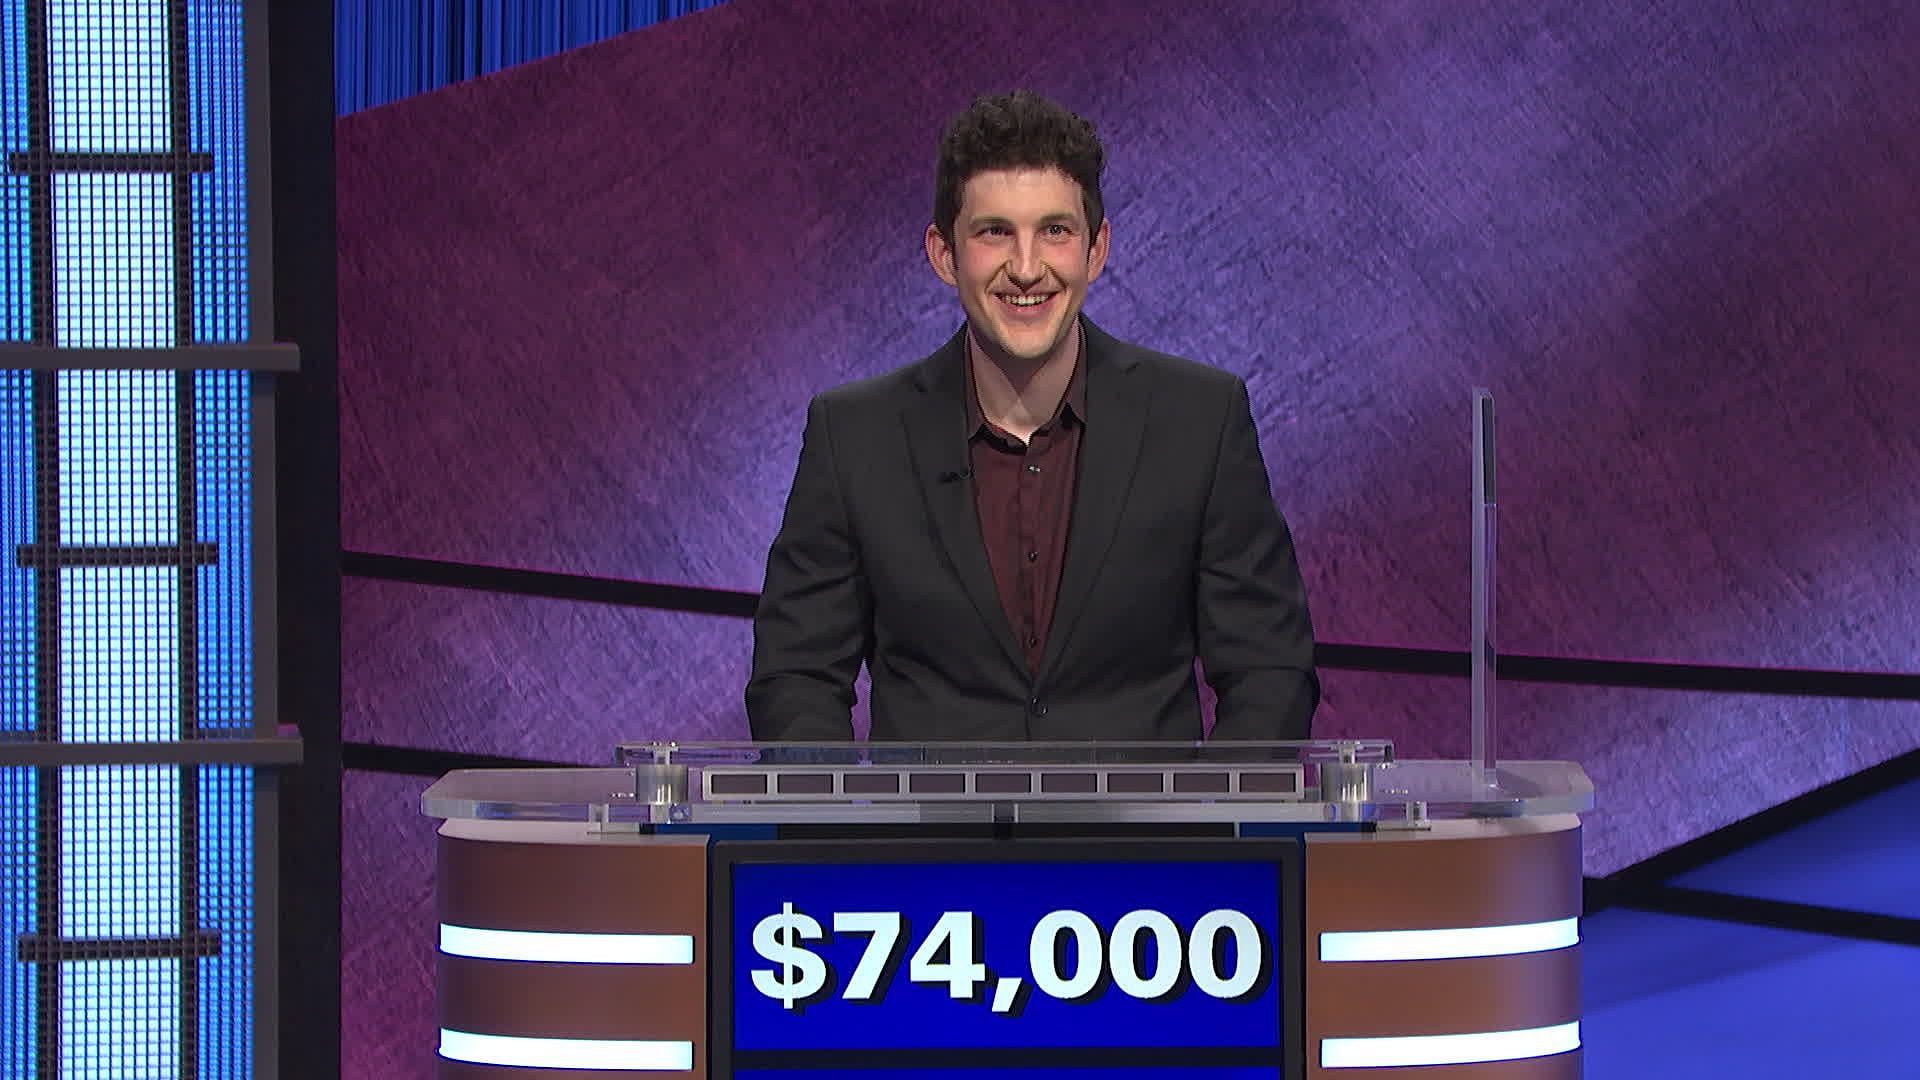 Today's Final Jeopardy! question, answer & contestants August 3, 2022